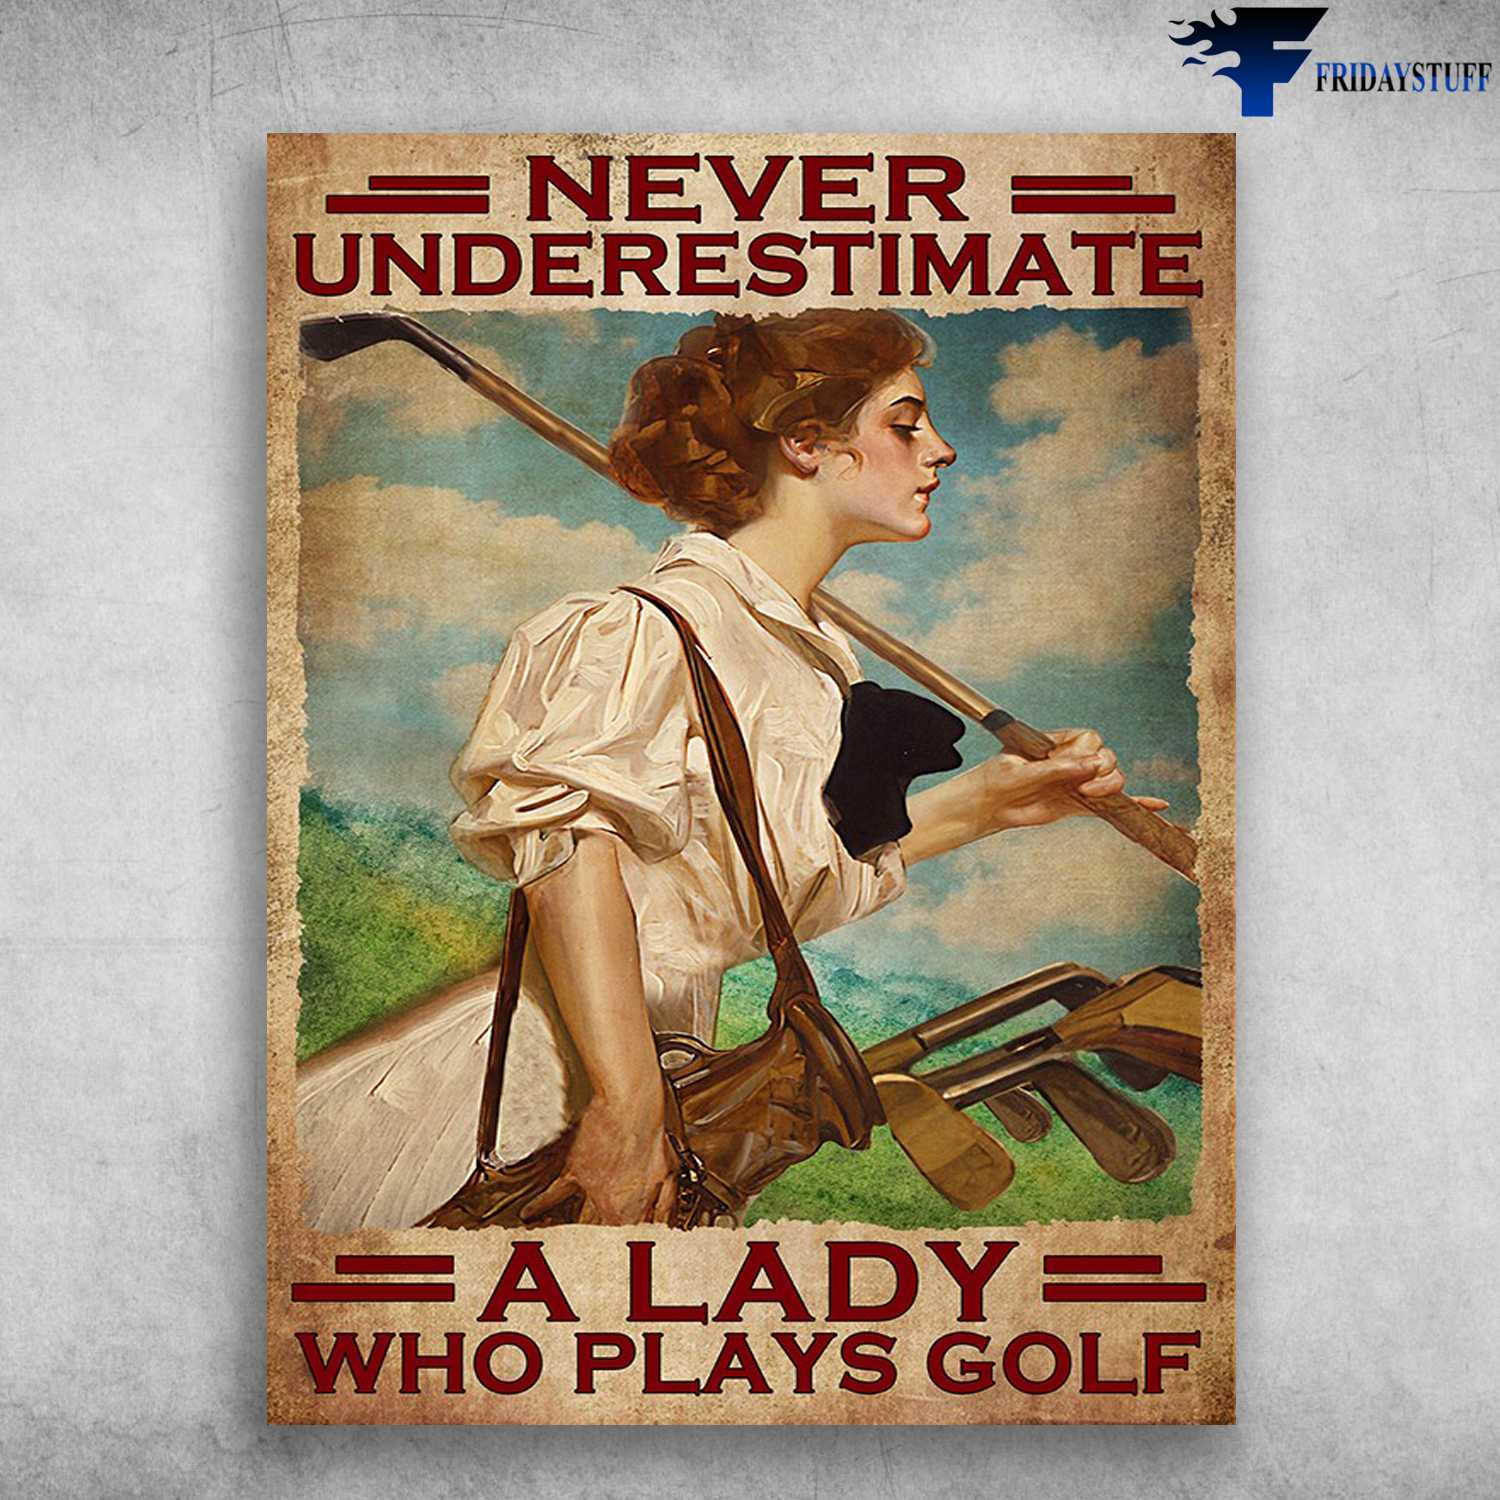 Golf Girl, Golf Poster - Never Underestimate, A Lady Who Plays Golf